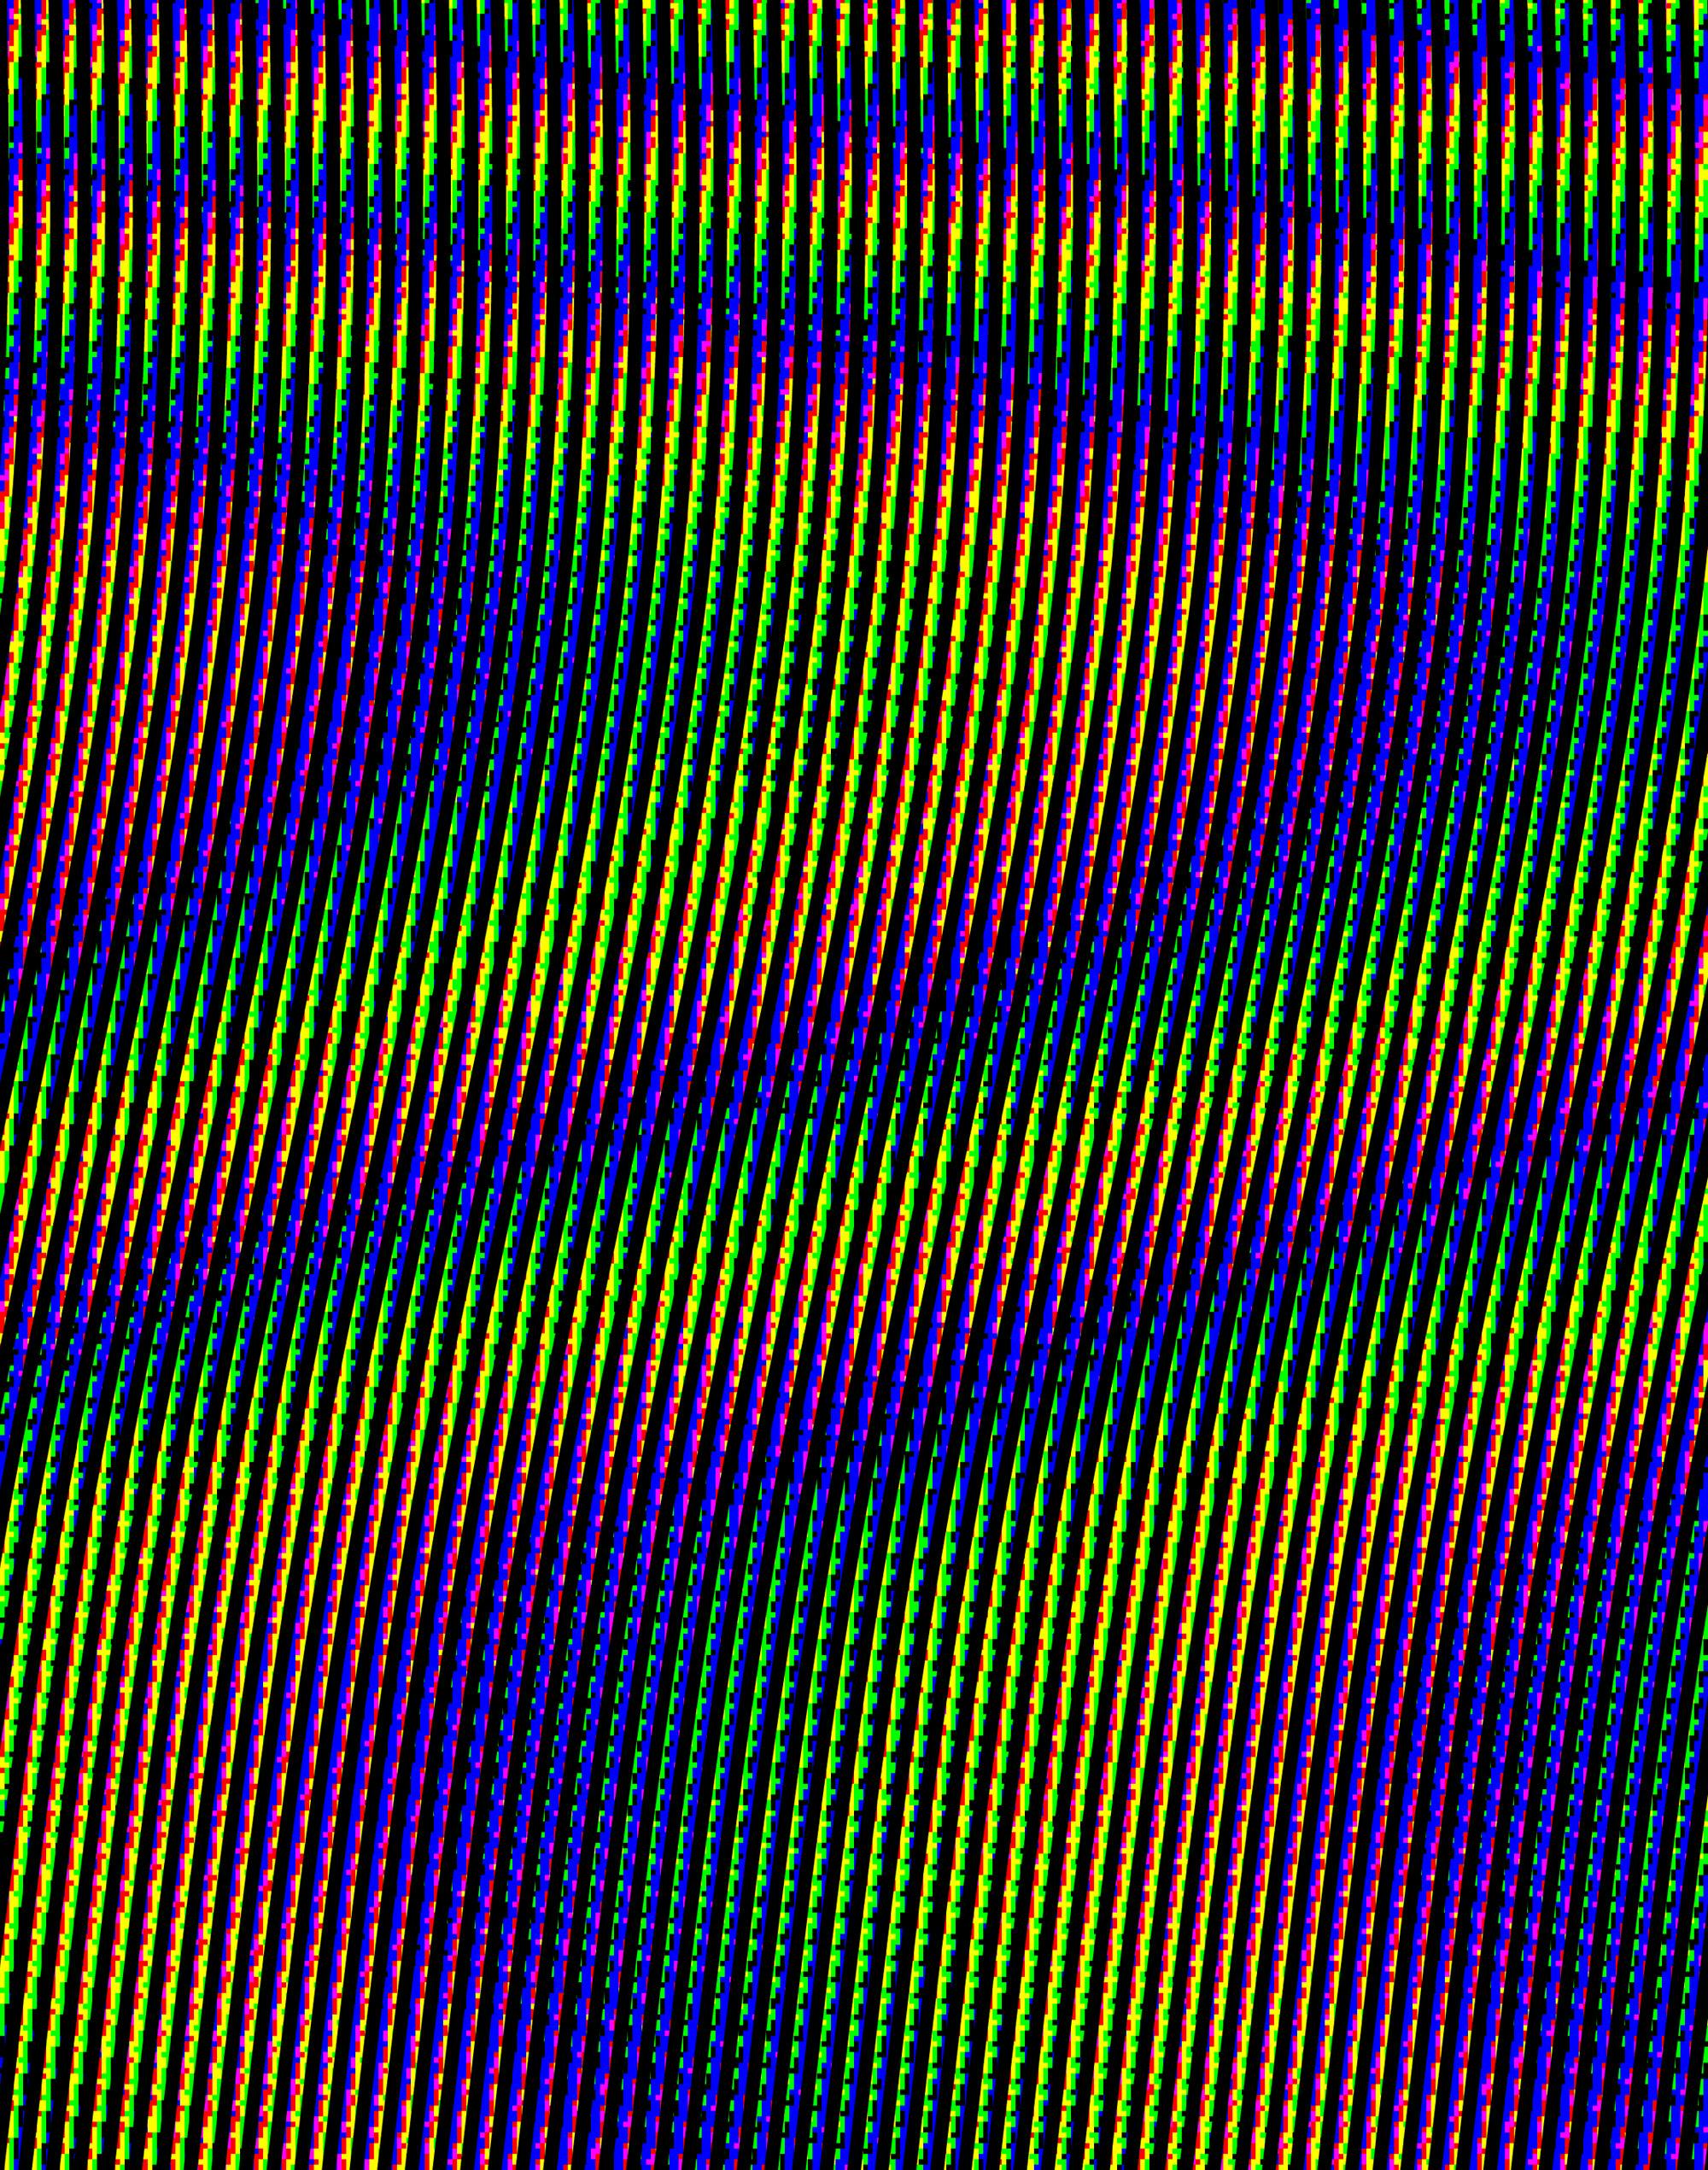 Vertical, curved black lines of pixels atop a pixelated, coloured background form a rainbow coloured Moiré pattern of undulating waves.